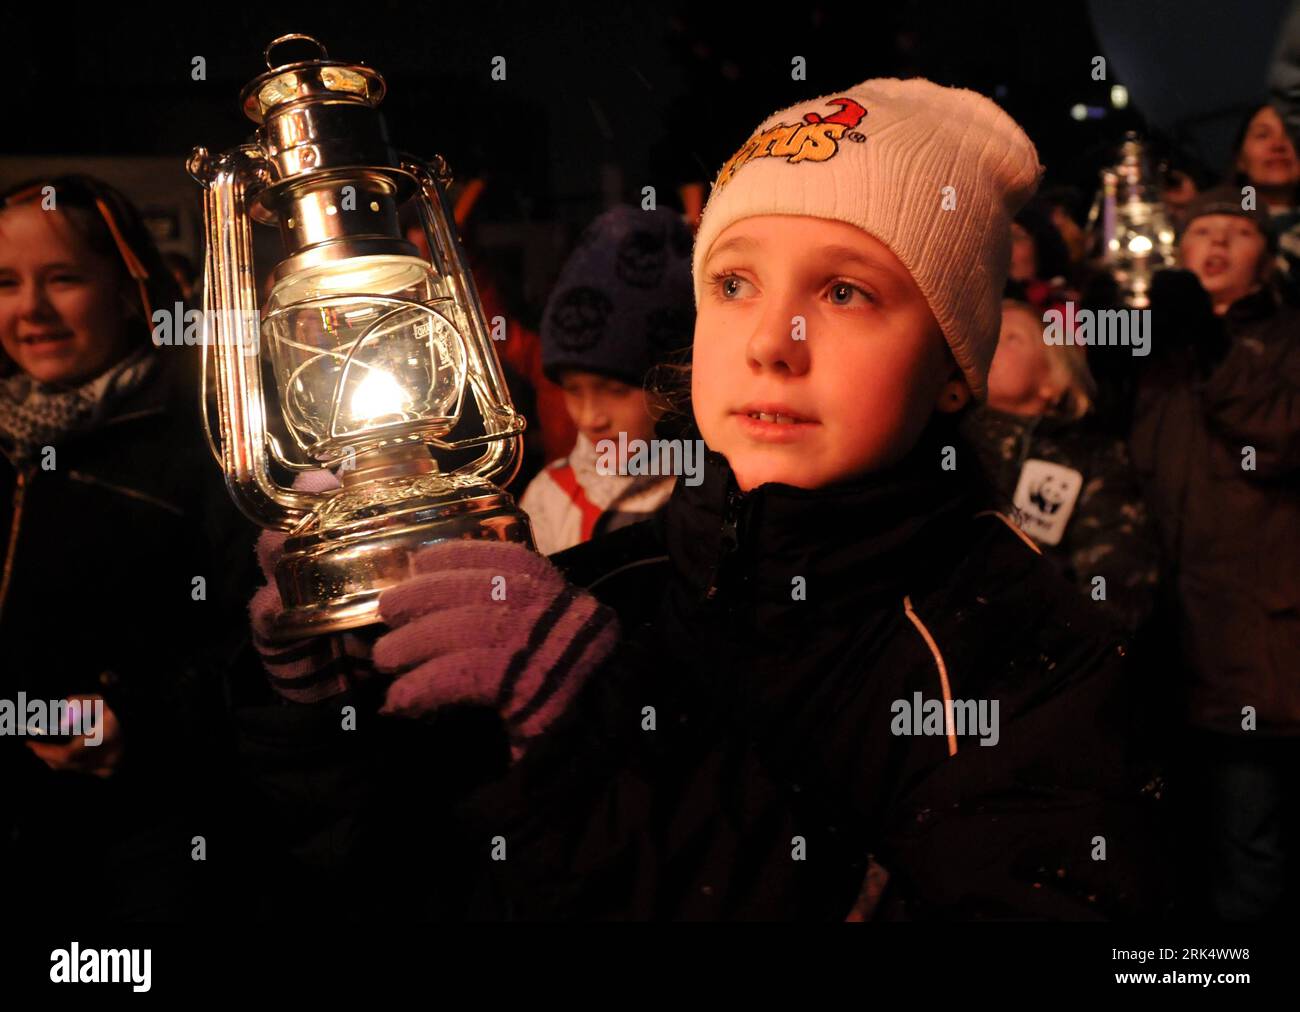 Bildnummer: 53675335  Datum: 16.12.2009  Copyright: imago/Xinhua (091217) -- COPENHAGEN, Dec. 17, 2009 (Xinhua) -- A girl holds a hurricane lamp during the Earth Hour Copenhagen in the capital city of Denmark, on Dec. 16, 2009. The Earth Hour Copenhagen event calls for households and businesses in the city to turn off their non-essential lights and other electrical appliances for one hour, aiming to raise awareness of the need to take action on climate change. (Xinhua/Xie Xiudong) (zl) (1)DENMARK-COPENHAGEN-EARTH HOUR PUBLICATIONxNOTxINxCHN Kopenhagen Kimaschutz Initiative eine 1 Stunde  Film Stock Photo